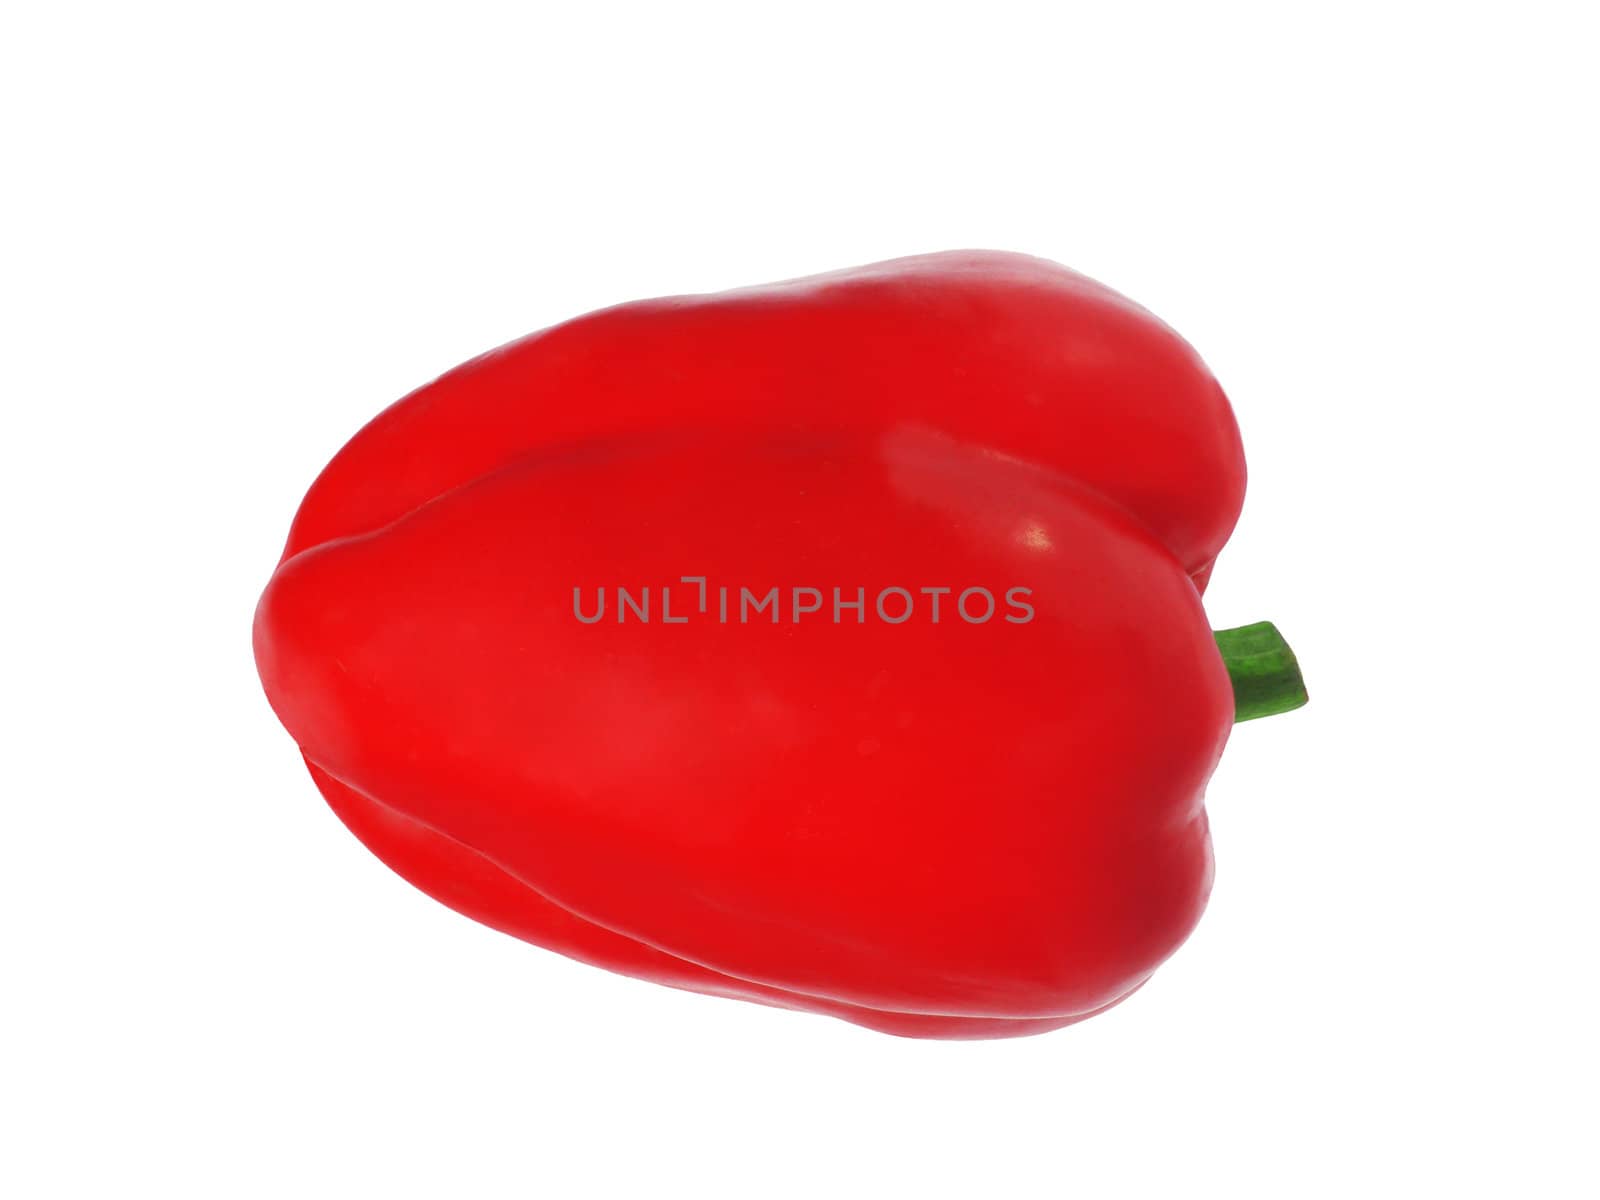 Red pepper isolated on white background  by NickNick